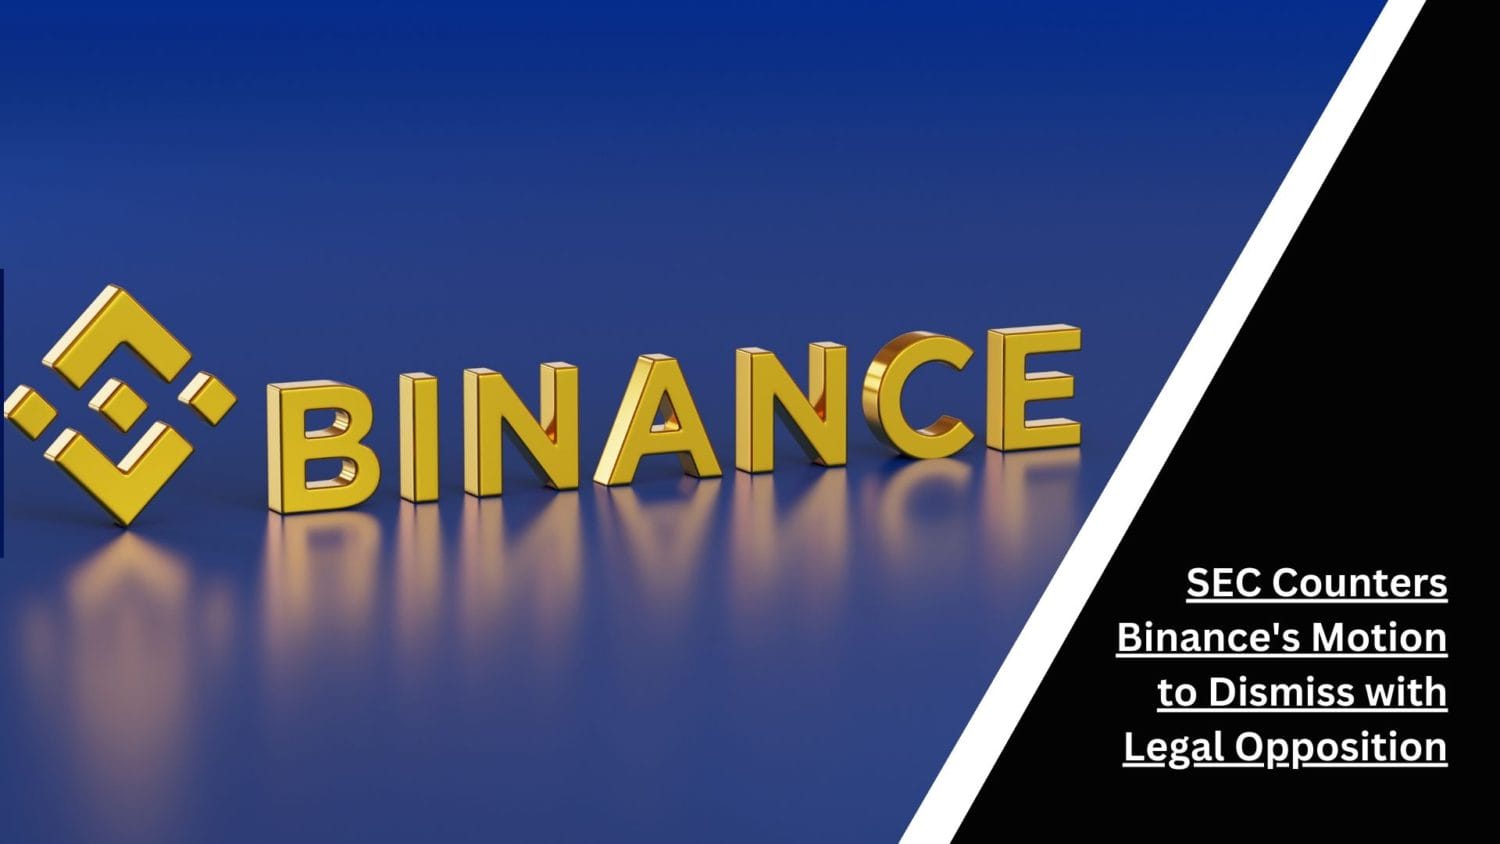 Sec Counters Binance'S Motion To Dismiss With Legal Opposition